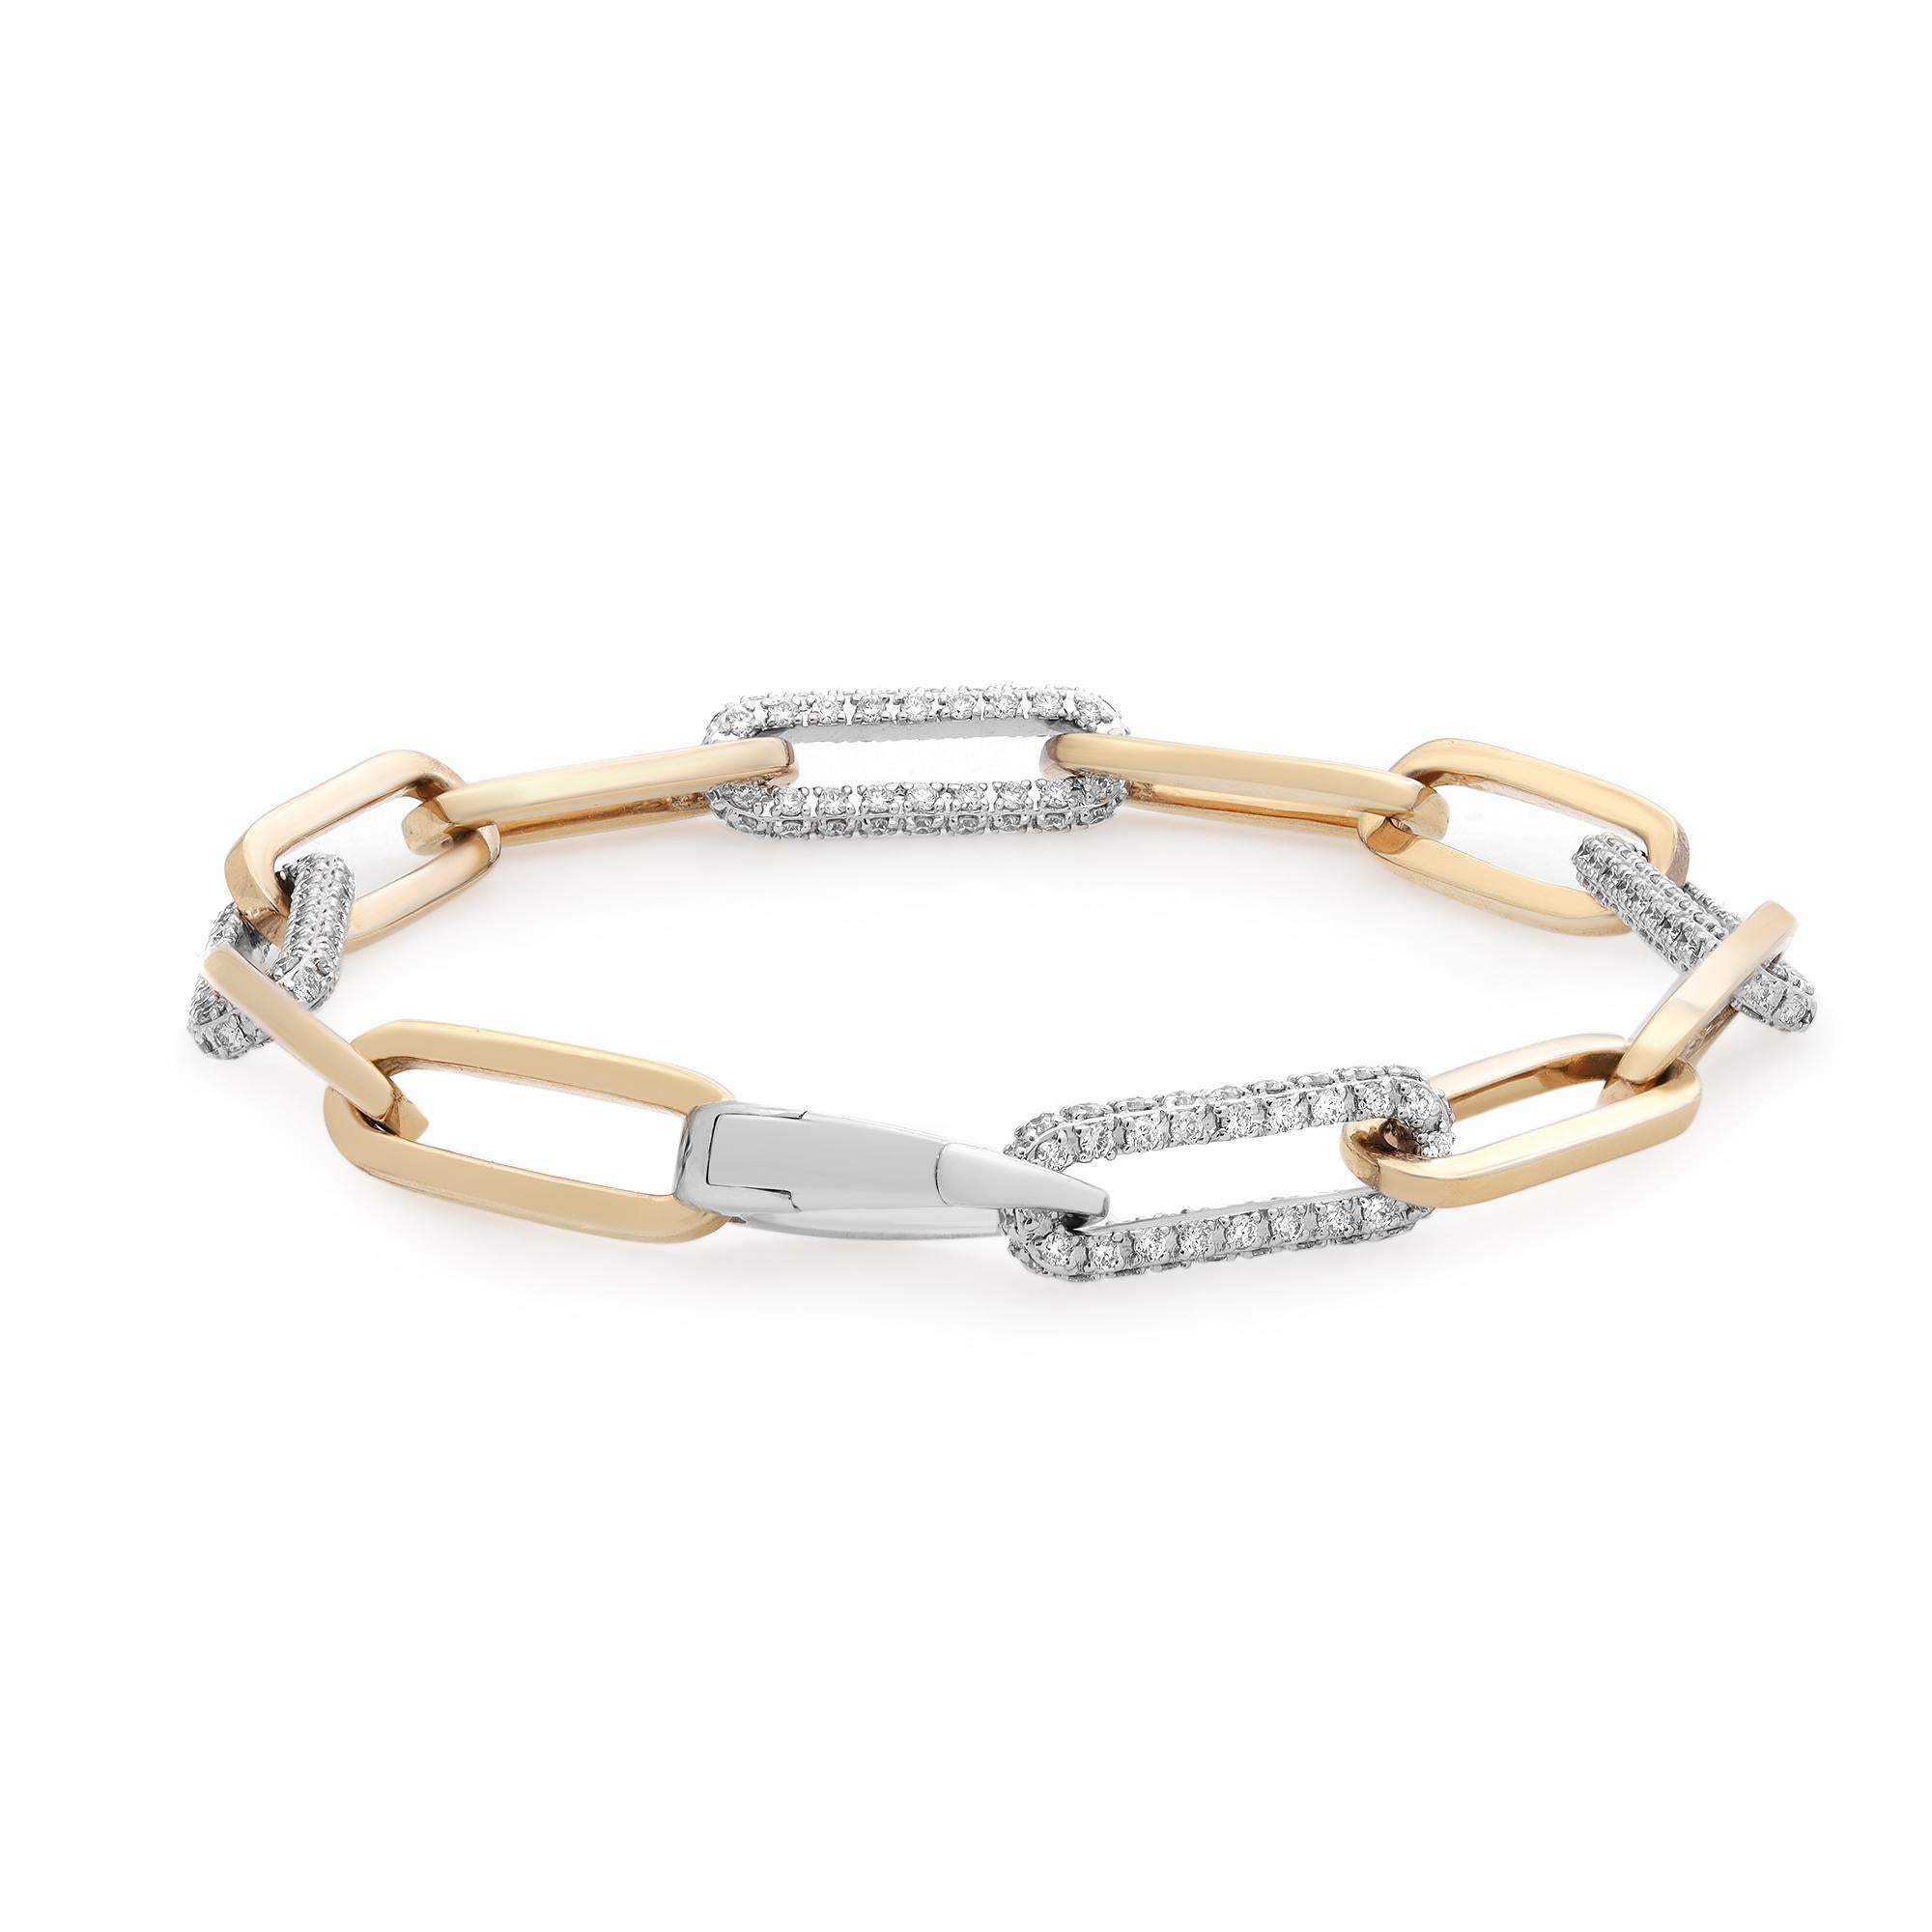 This trendy and chic bracelet features paper clip links crafted in 14k yellow gold with alternate diamond studded paper clip links crafted in 14k white gold. Total diamond weight: 2.21 carats. Diamond quality: color G-H and clarity VS-SI. Bracelet